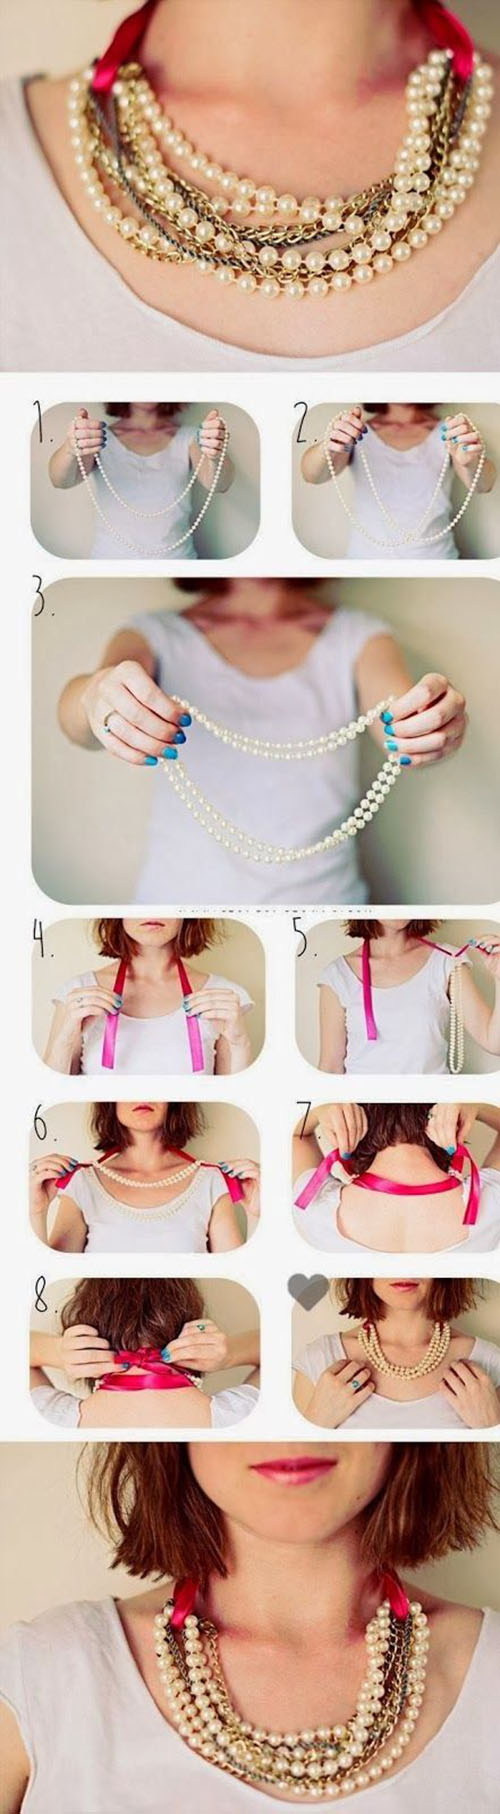 DIY Pearl Necklace In Seconds11